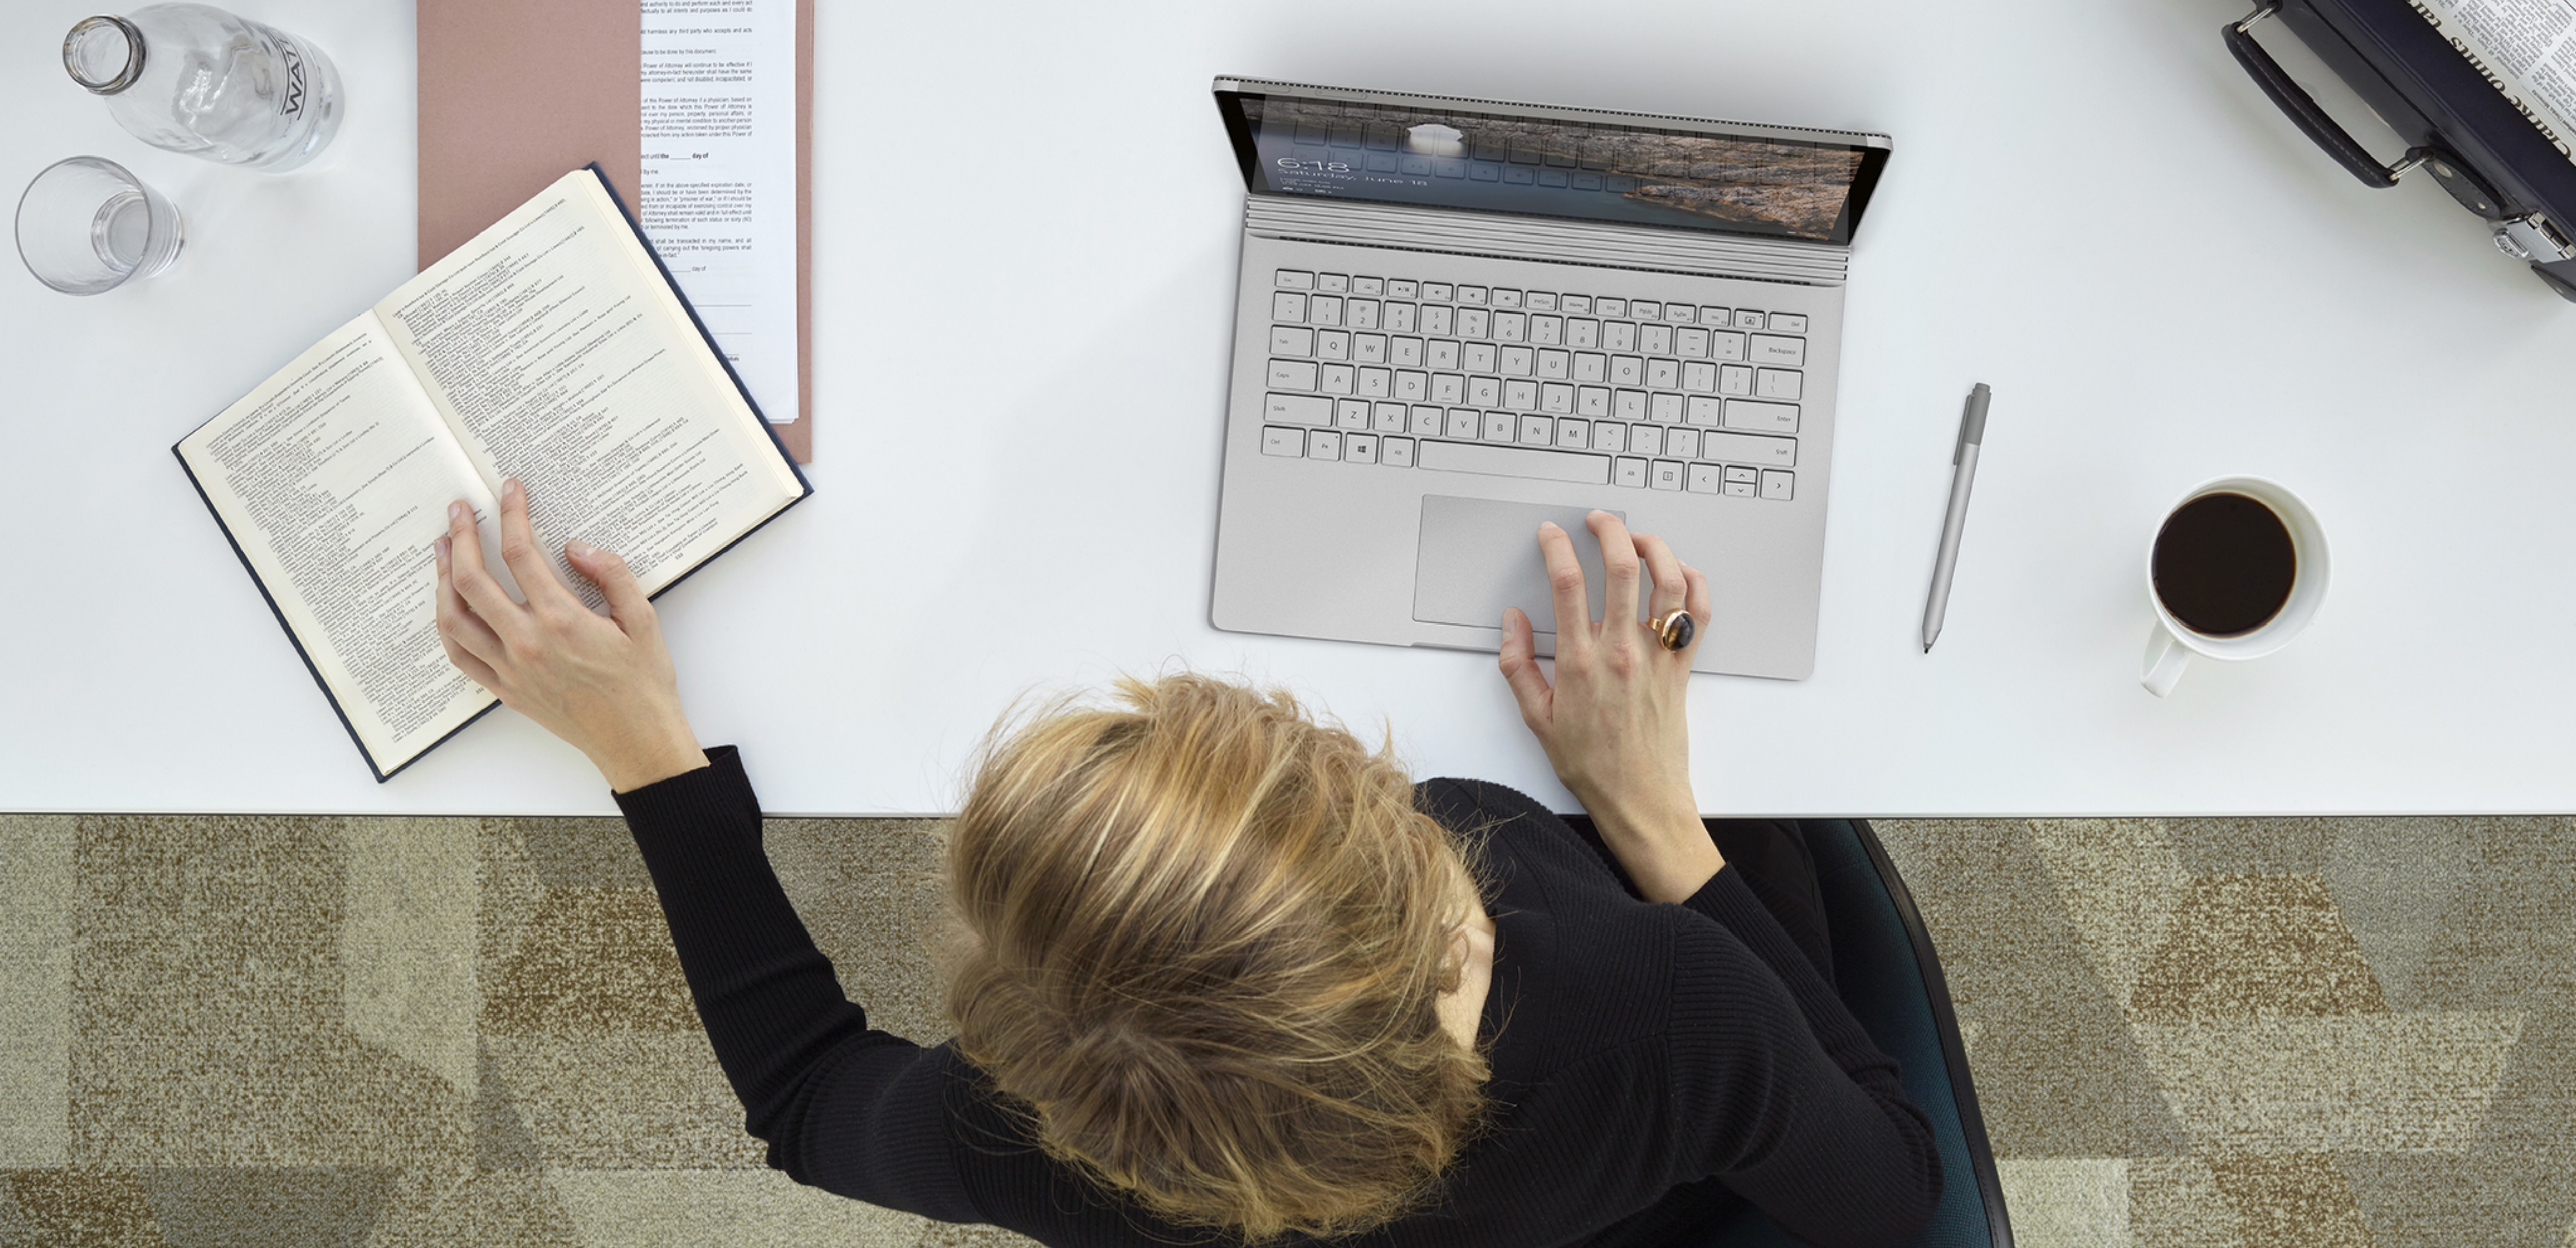 Owning Surface just got easier with the new Surface Plus Program